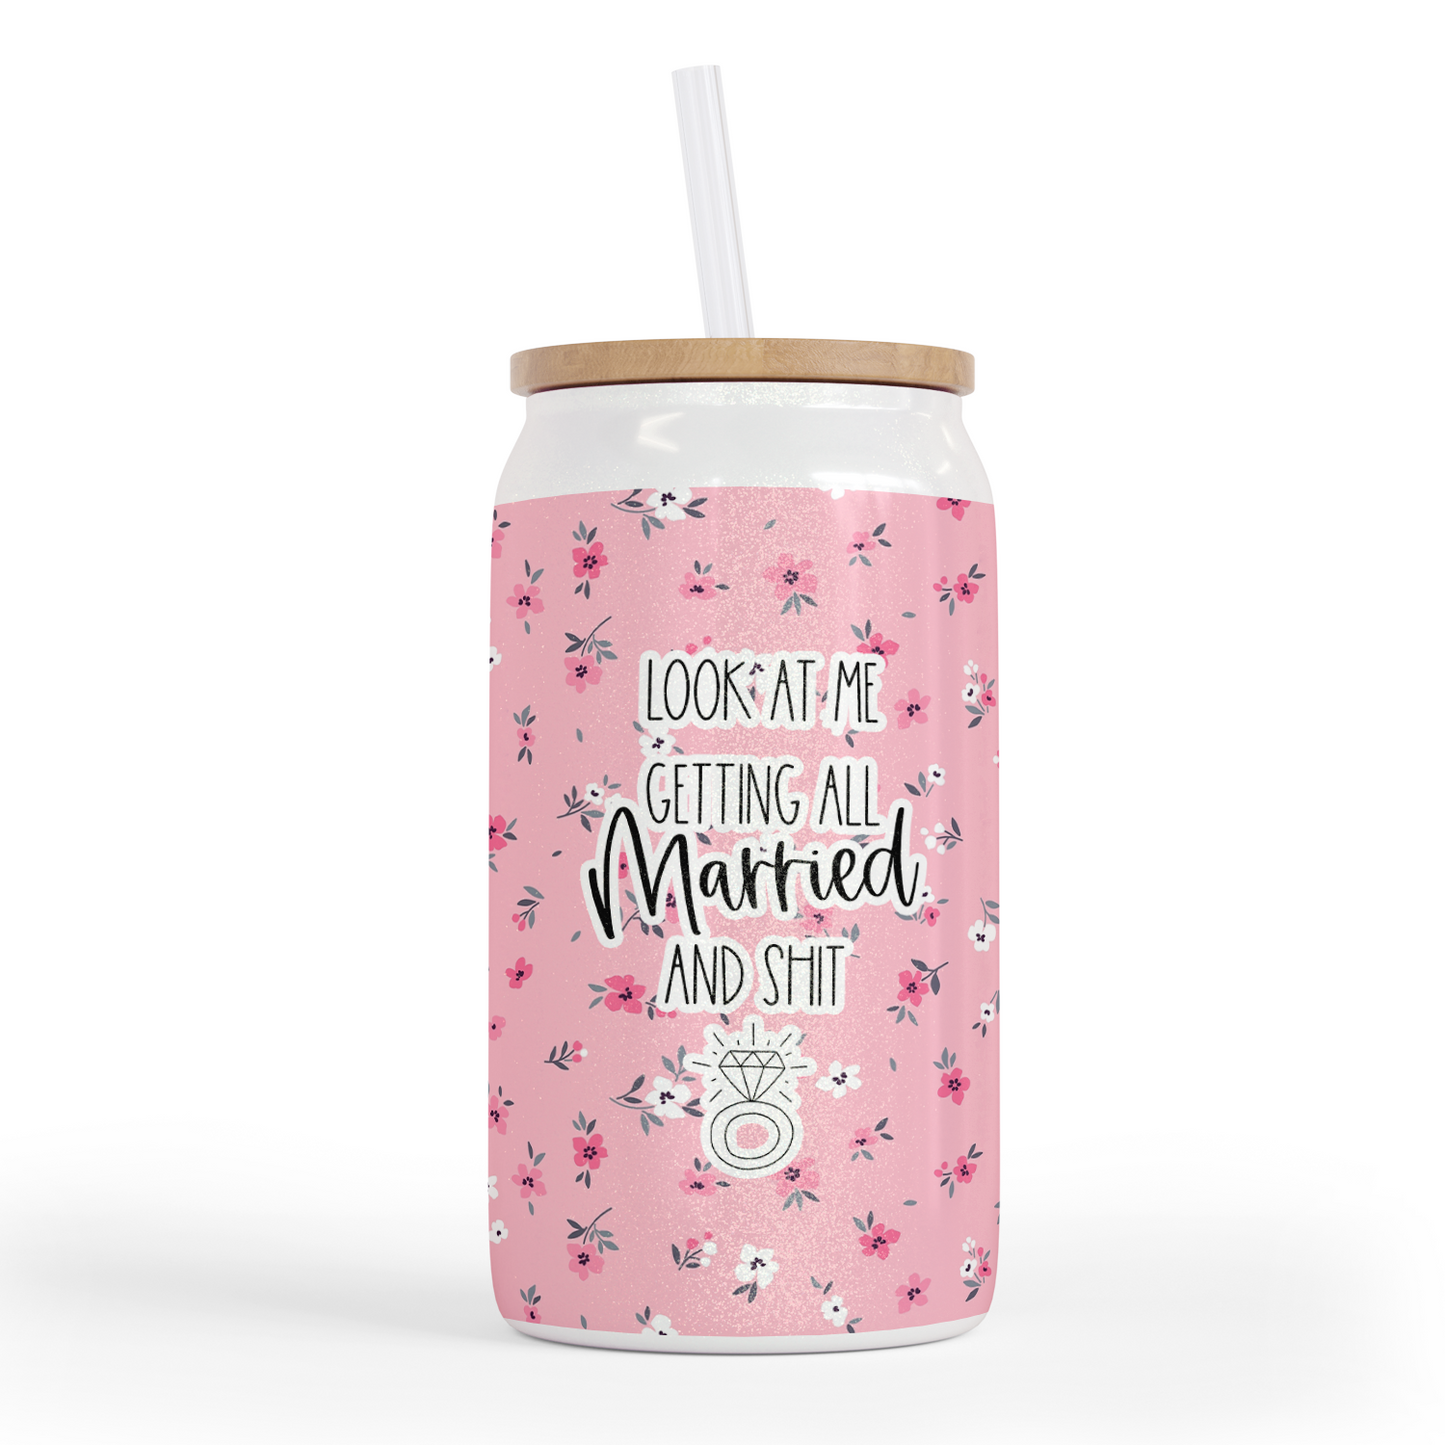 Look At Me Getting All Married and Shit 16 Oz Shimmer Glass Jar